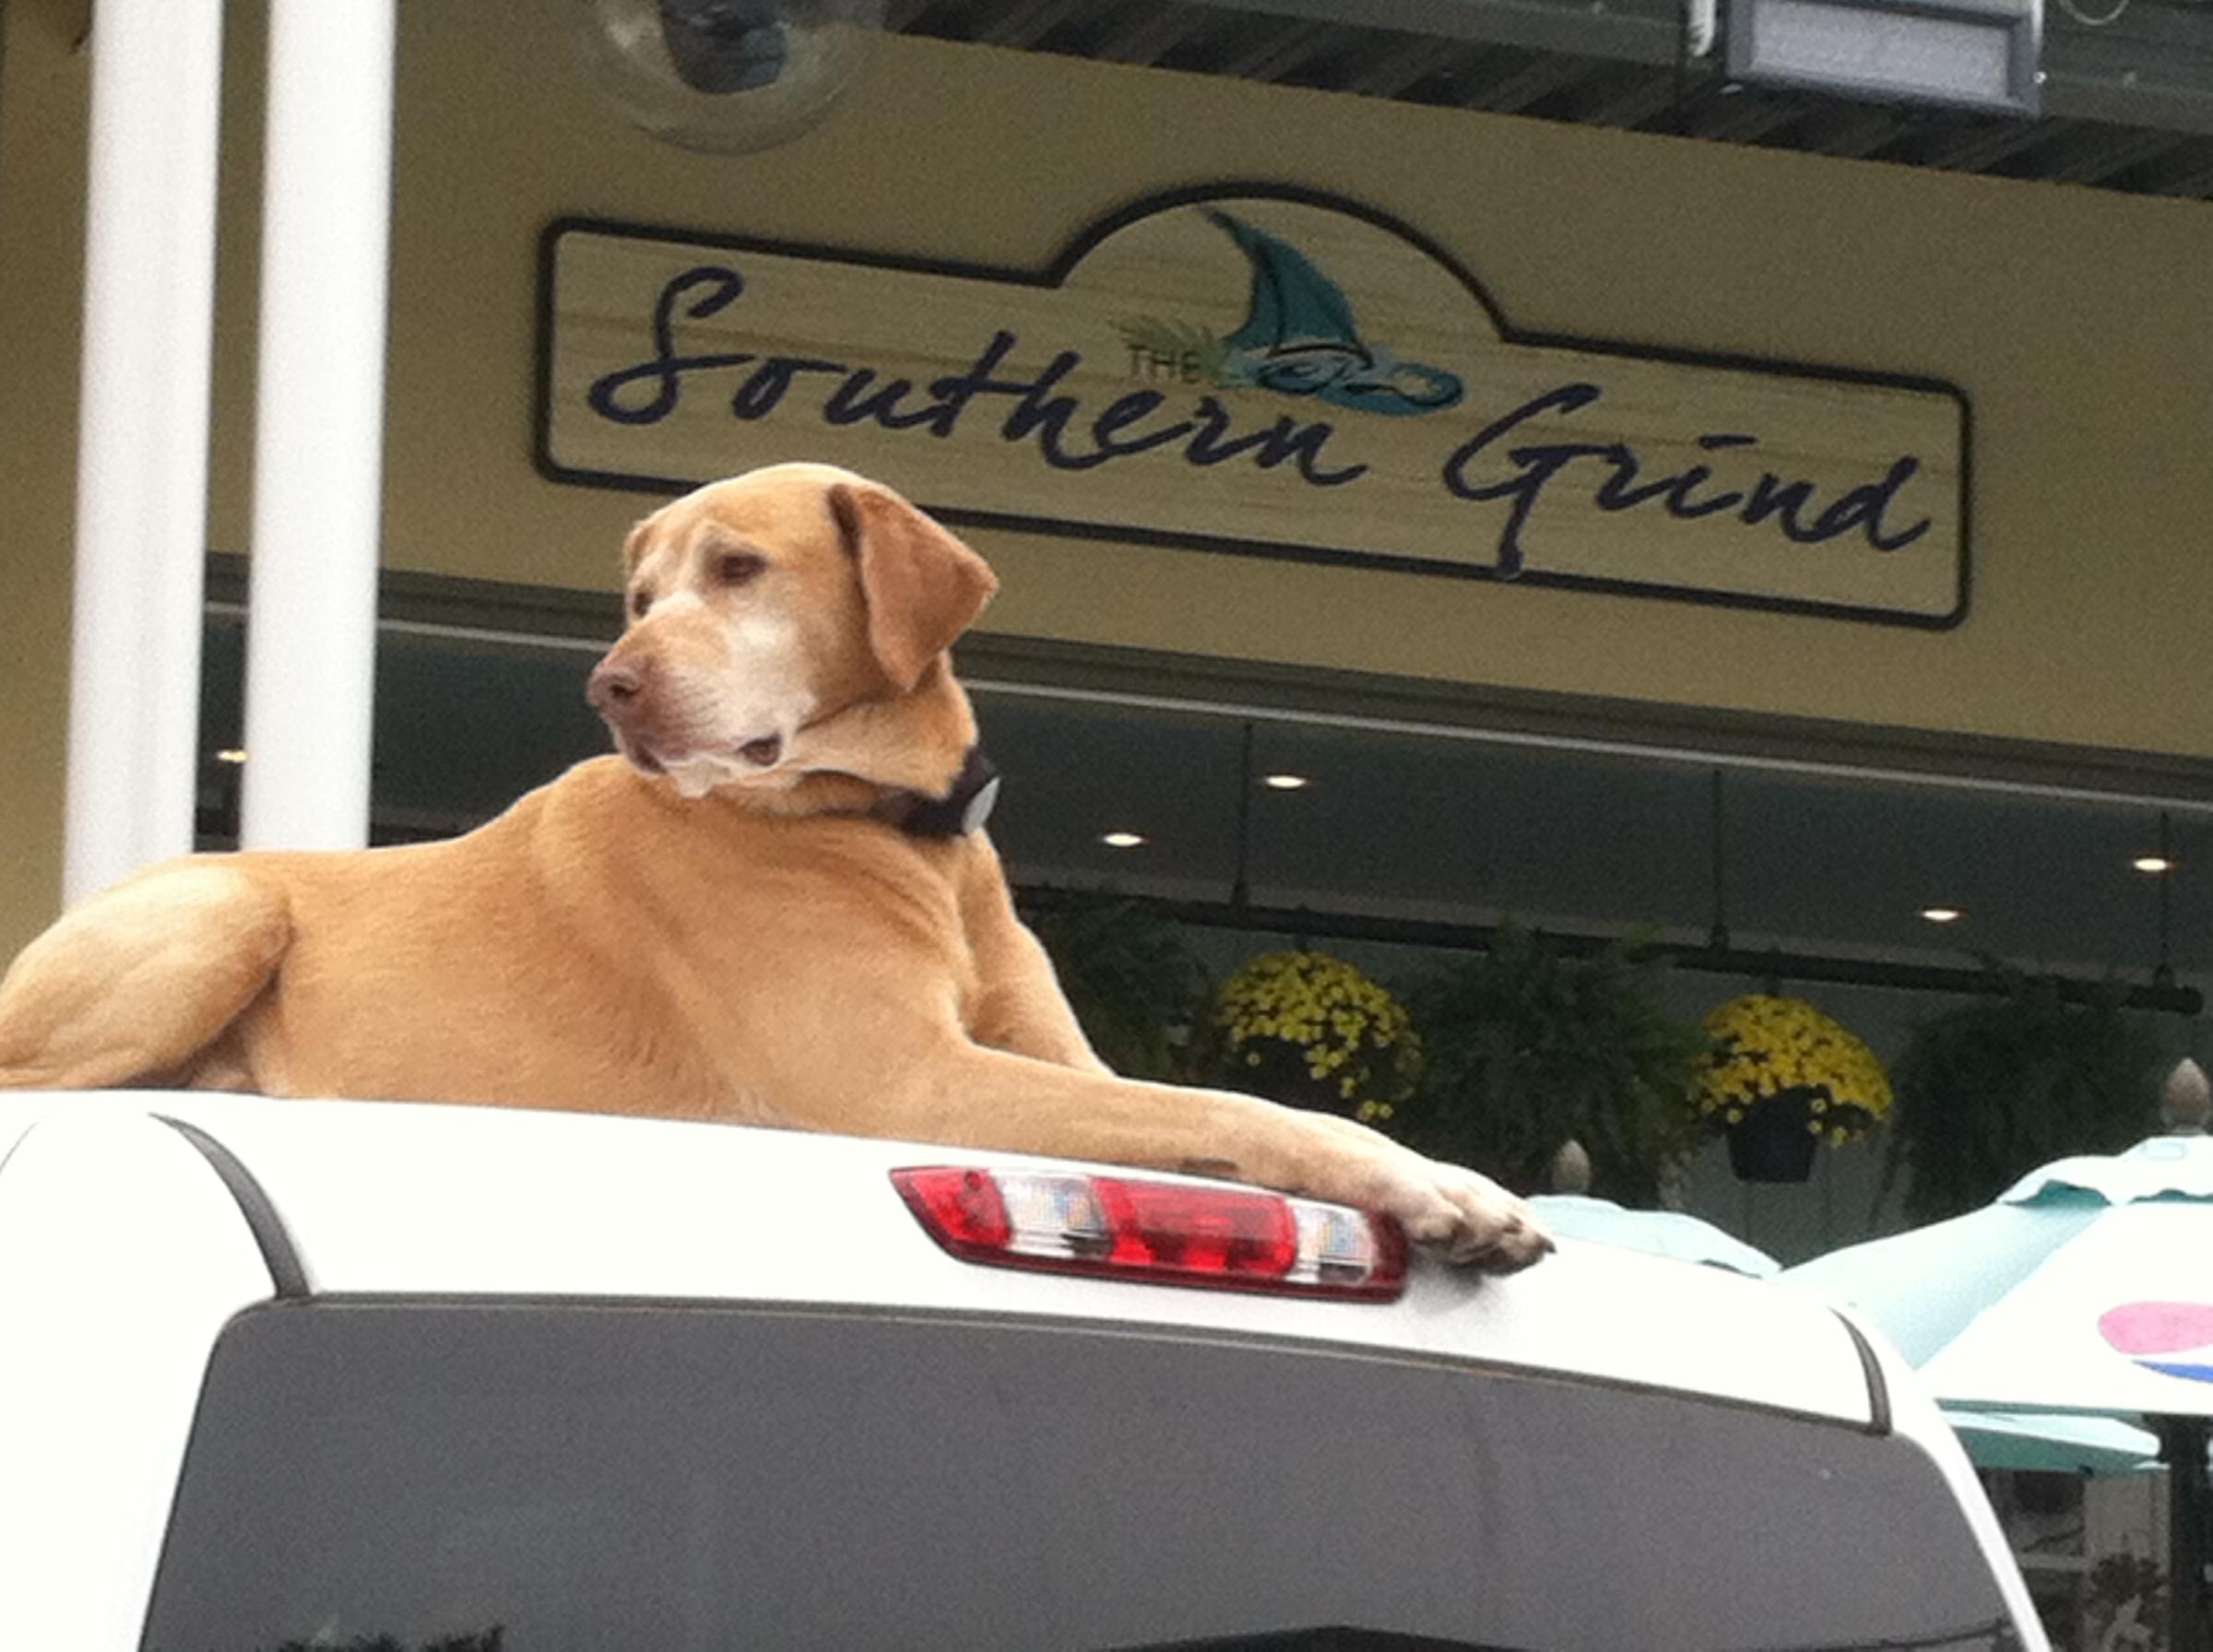 Pet Friendly The Southern Grind Coffee House